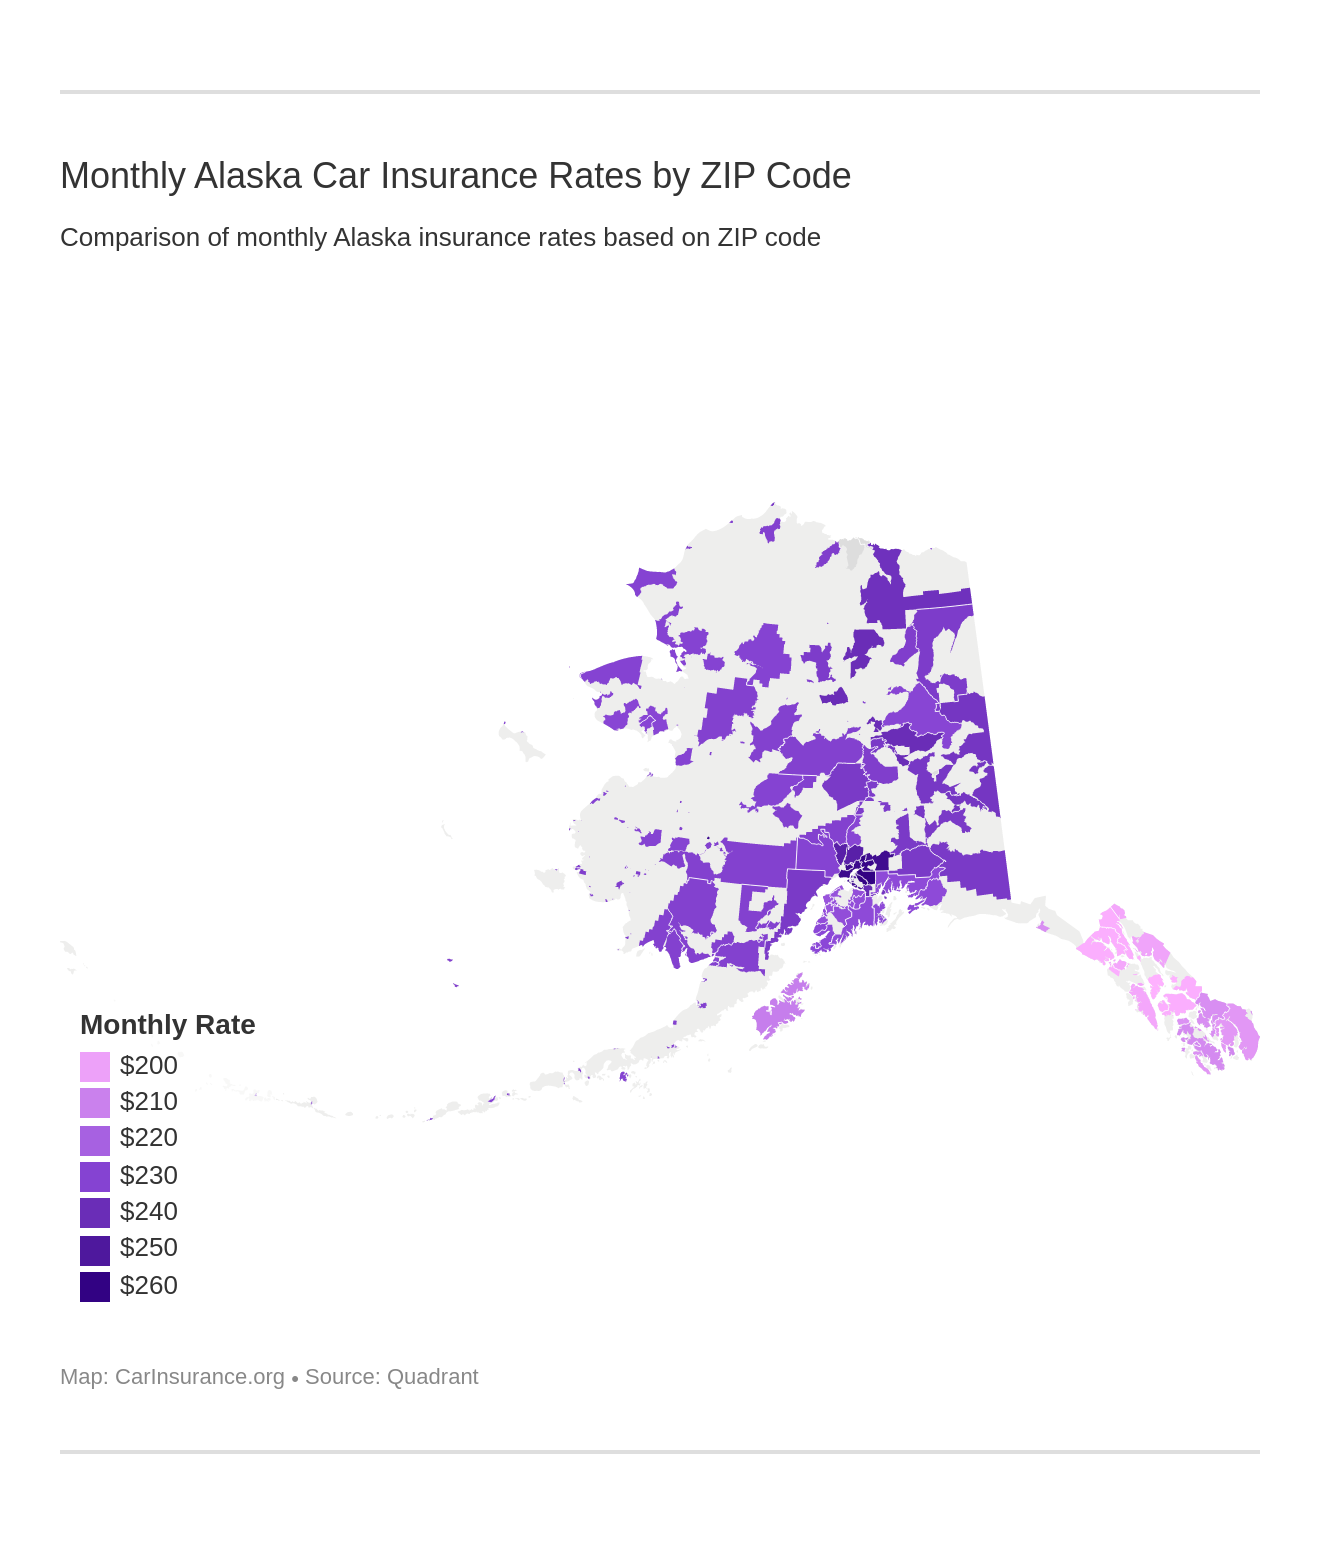 Monthly Alaska Car Insurance Rates by ZIP Code